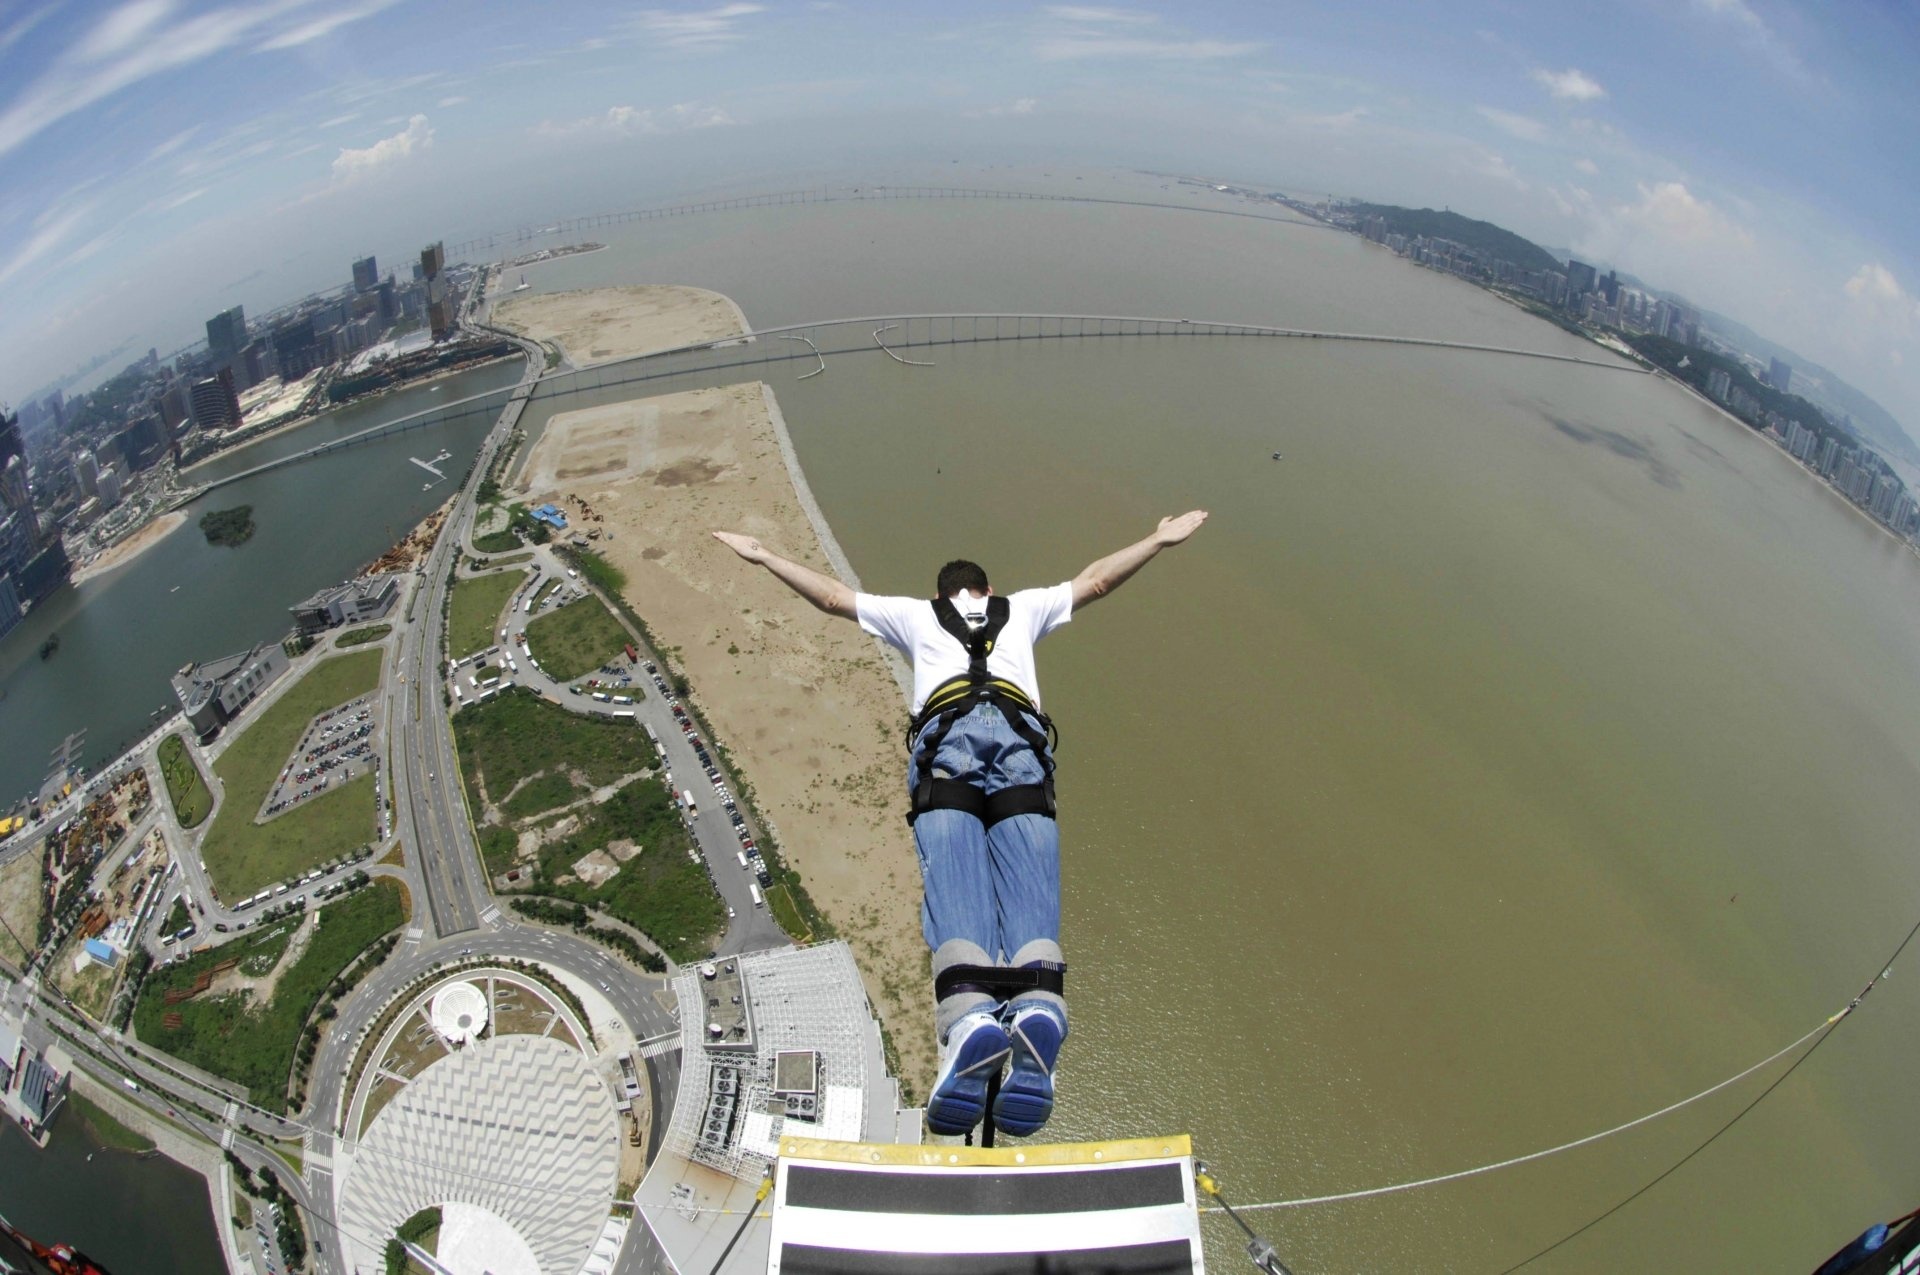 Bungee Jumping: World's highest commercial launching pad, Macau tower, Fall from extreme heights. 1920x1280 HD Background.